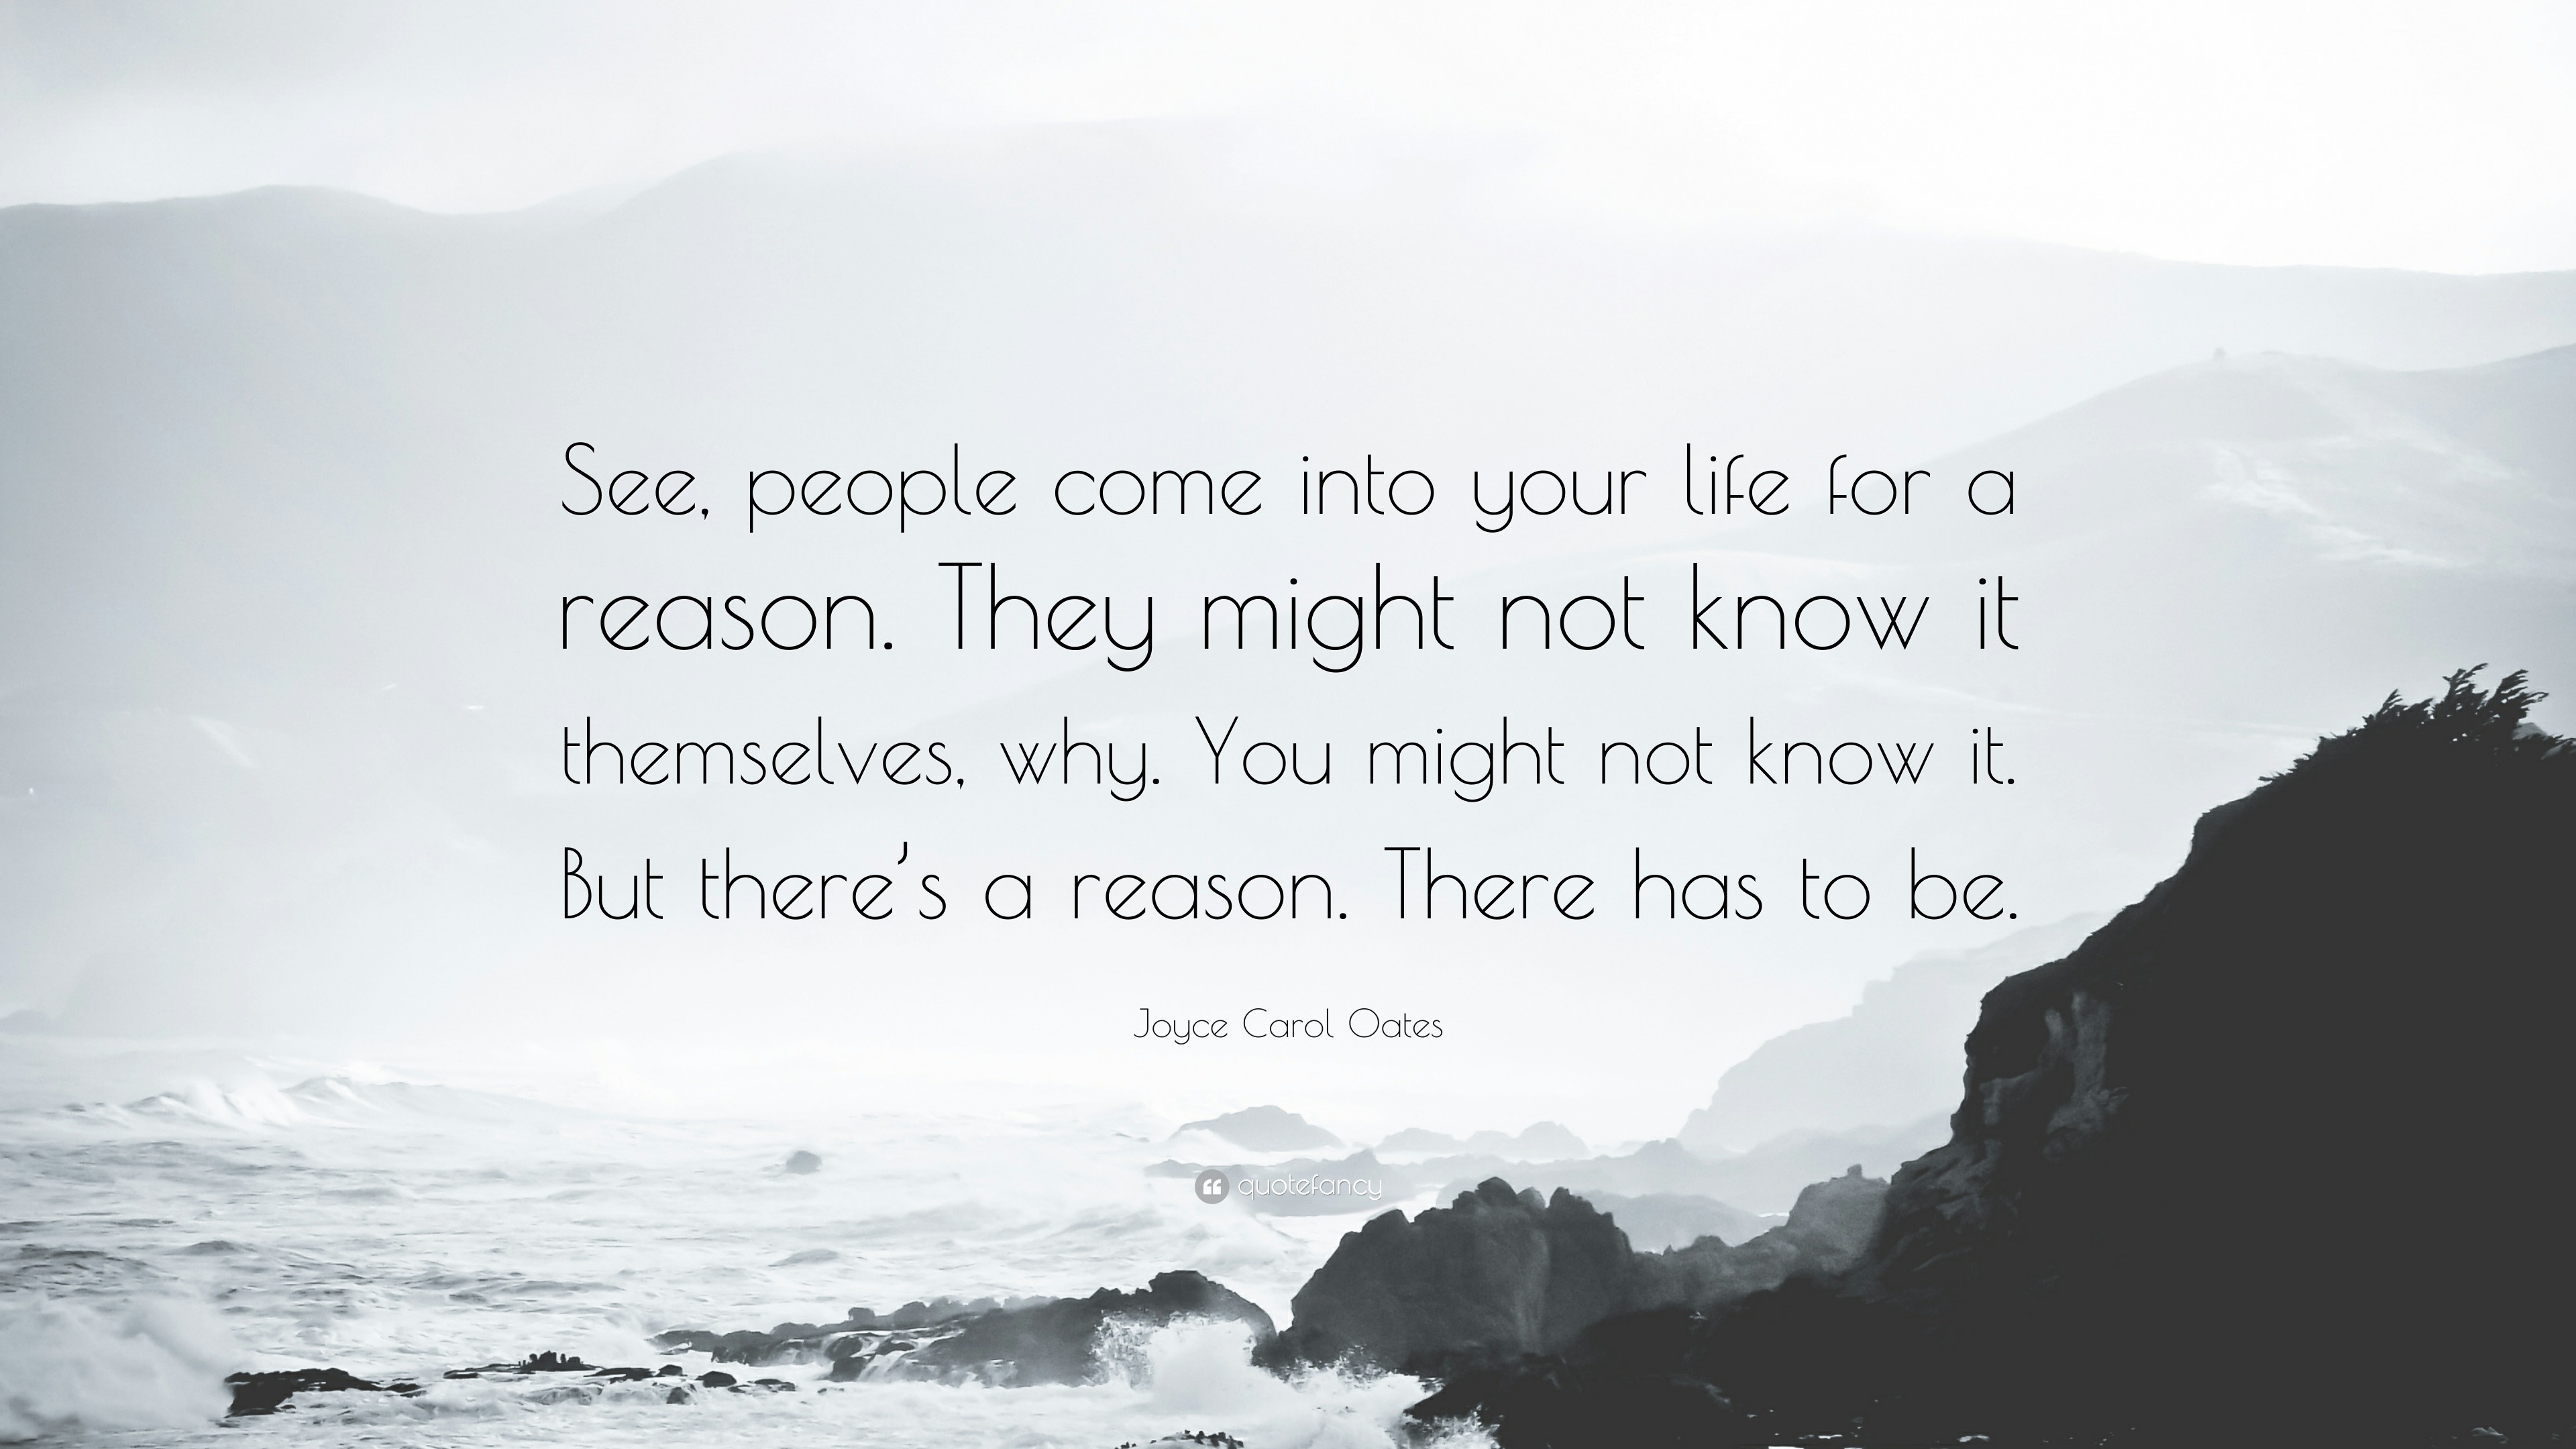 Joyce Carol Oates Quote: "See, people come into your life for a reason. They might not know it ...